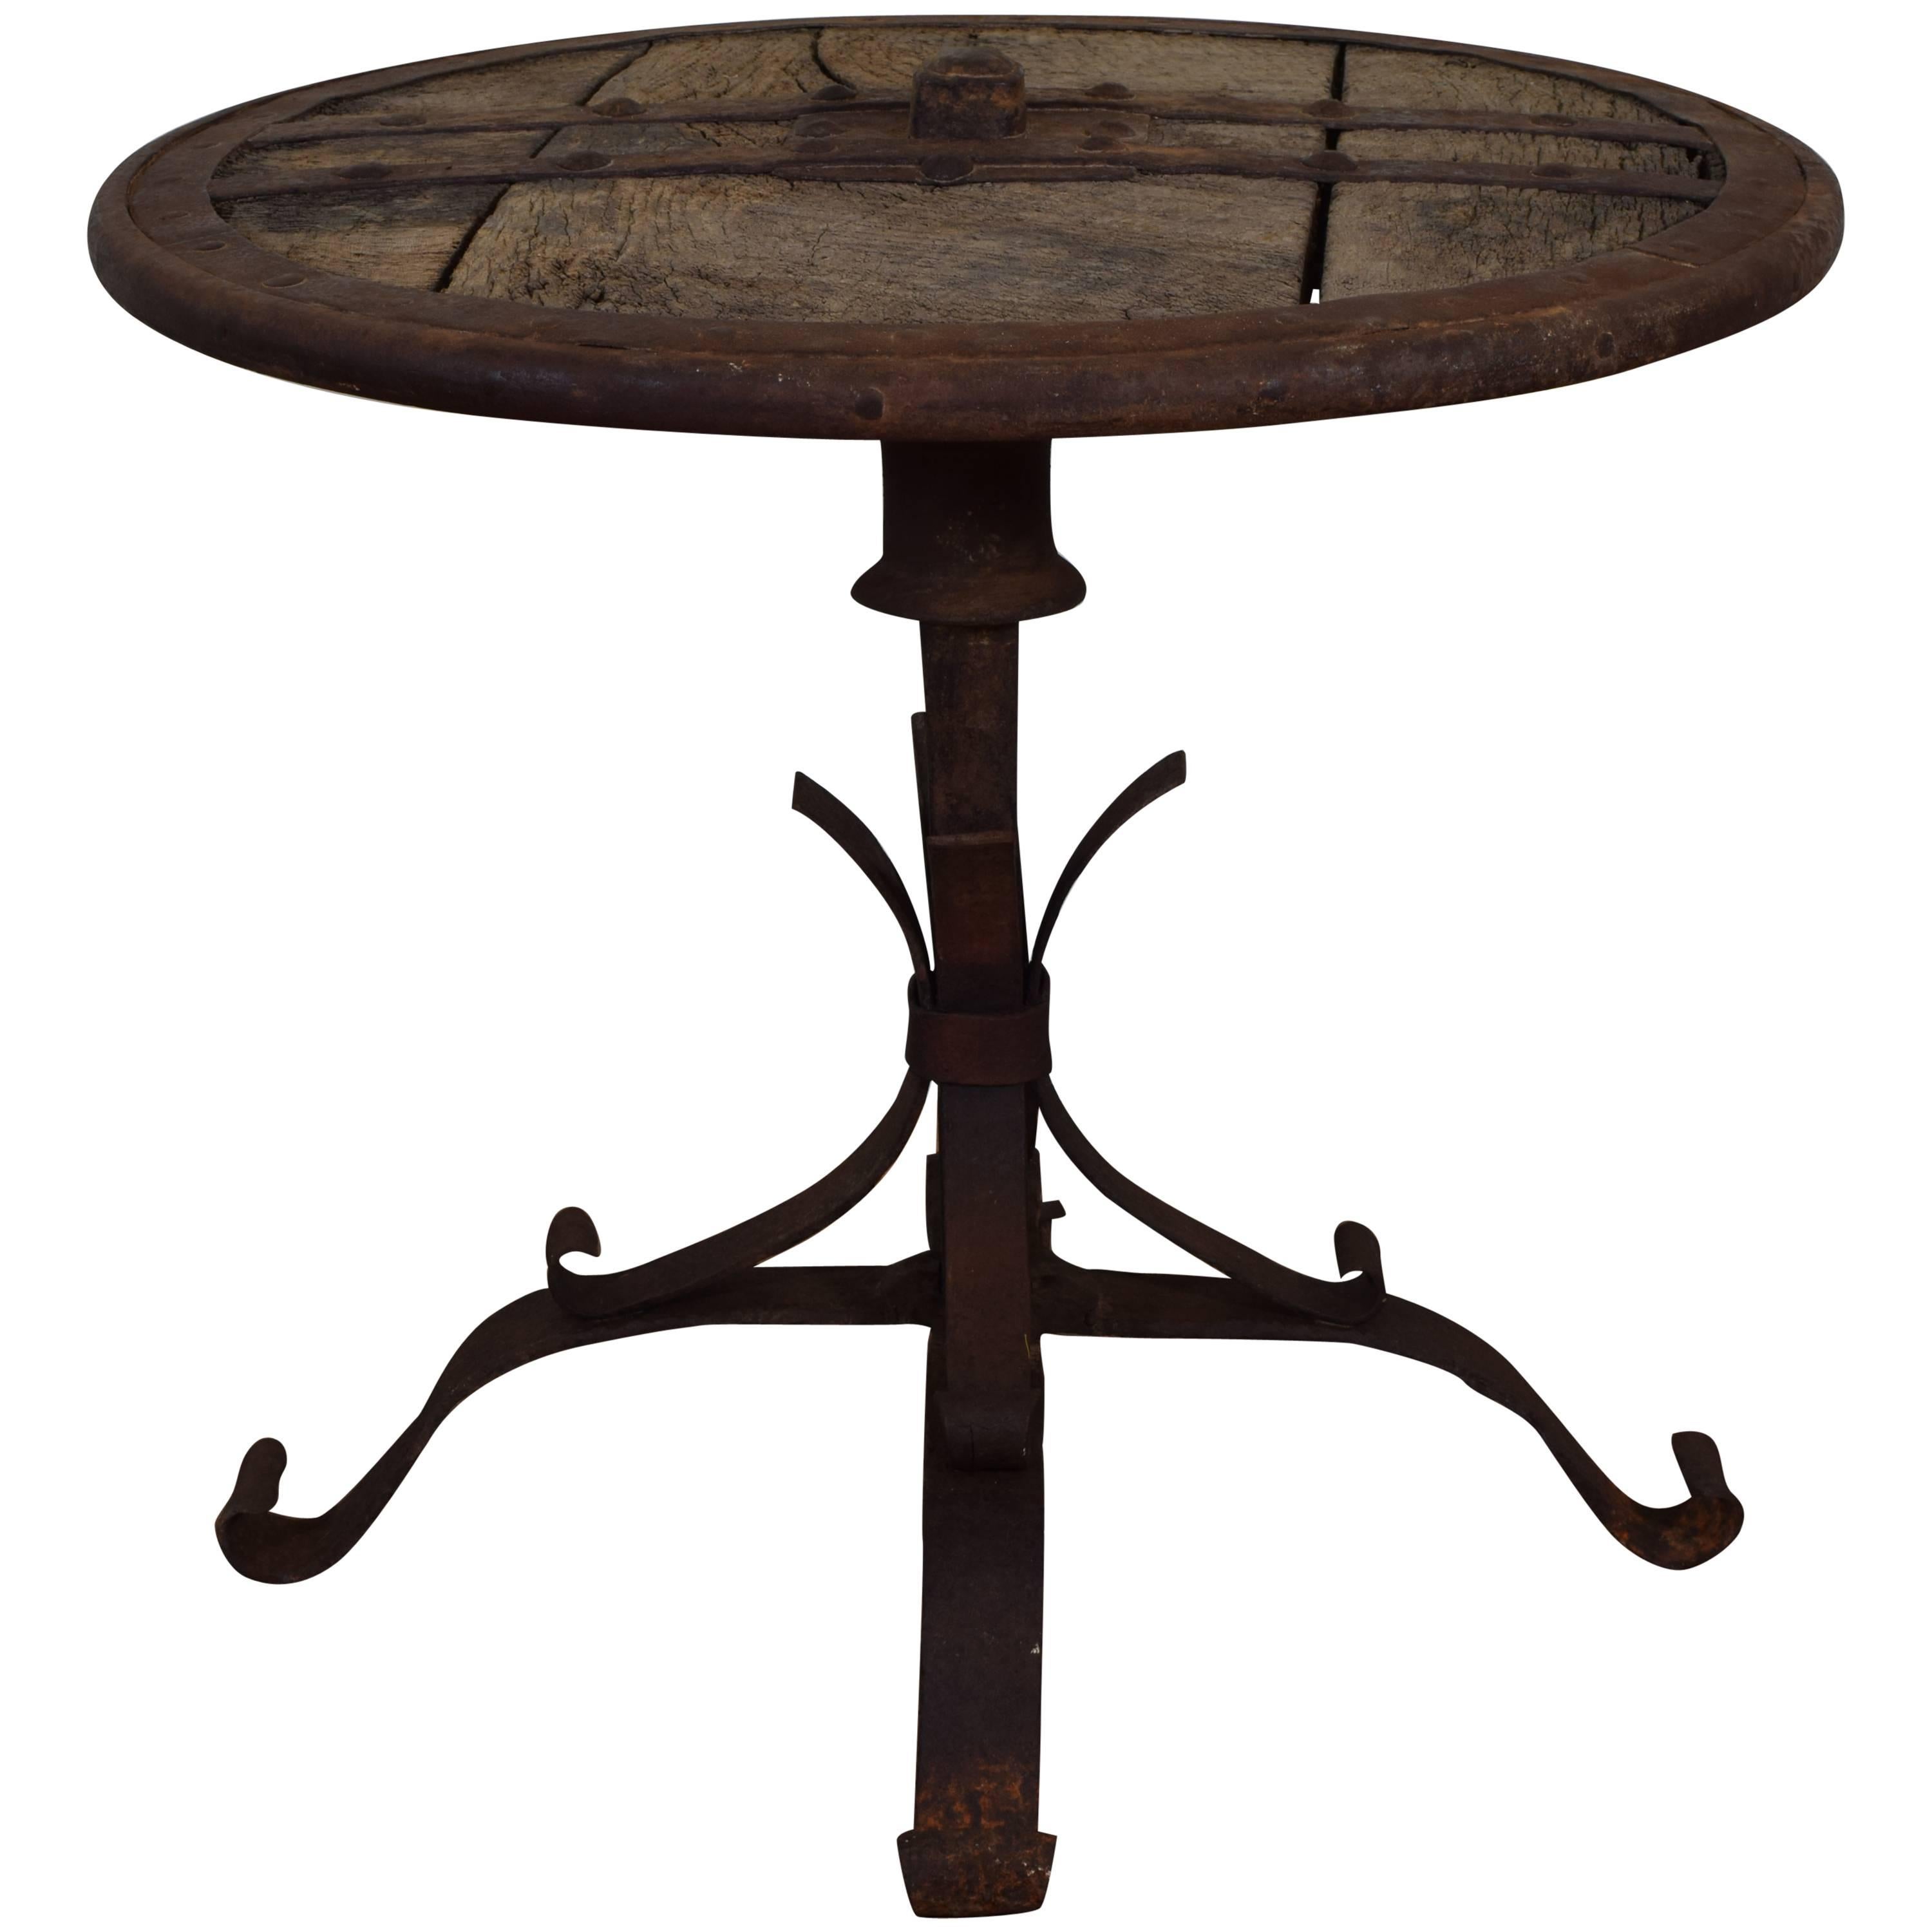 French Wrought Iron Banded and Wooden Circular Table, 19th Century or Earlier